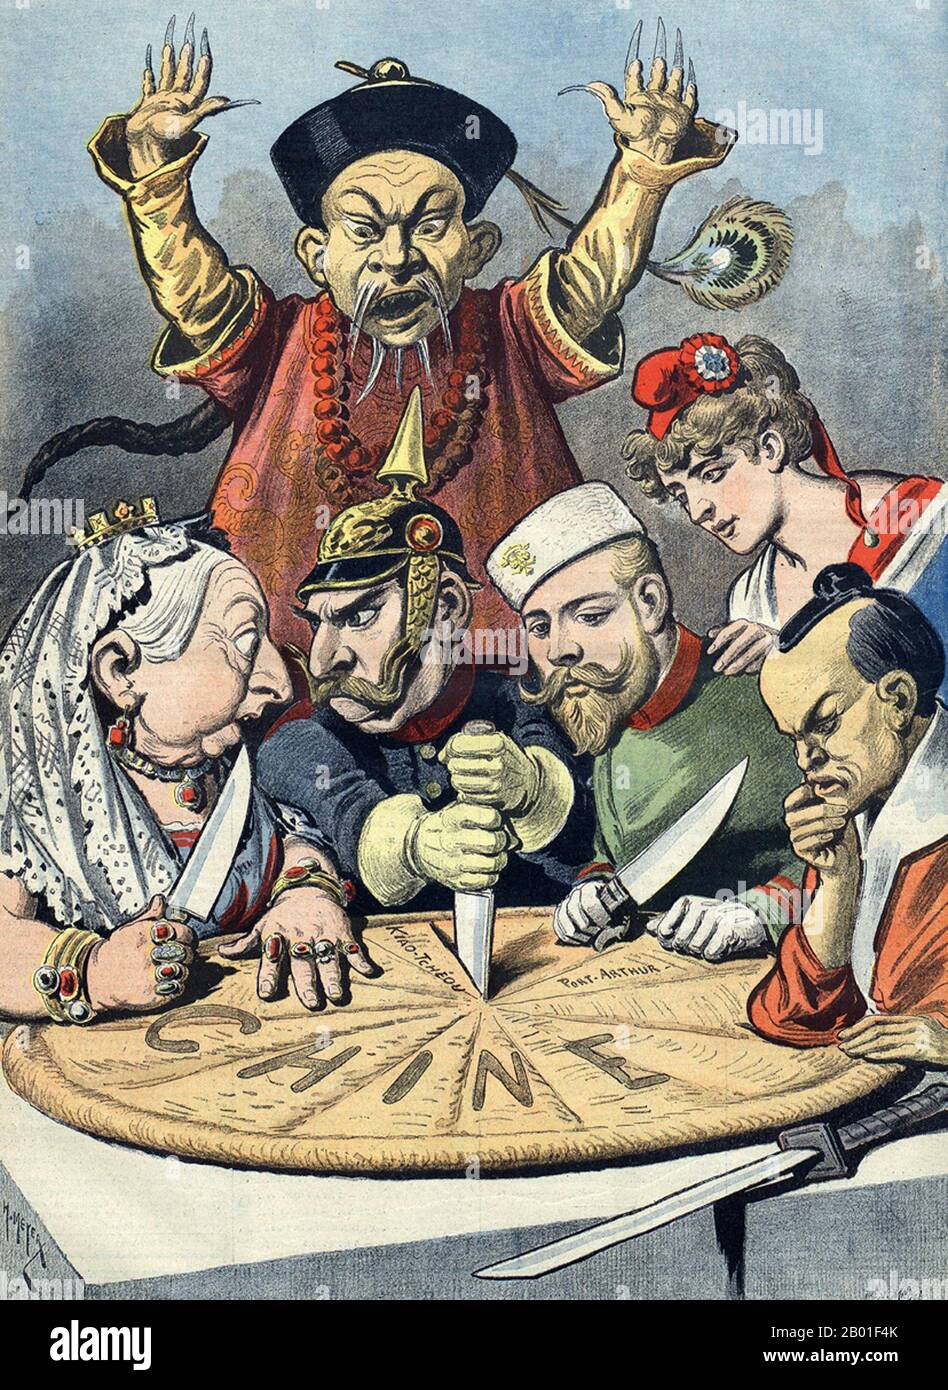 China: 'China -- the cake of kings... and emperors'. European powers and Japan collectively carving up China in this French satirical cartoon by Henri Meyer (6 March 1841 - 18 July 1899), 'Let Petit Journal', 16th January 1898.  A pie represents 'Chine' (French for China) and is being divided between caricatures of Queen Victoria of the United Kingdom, William II of Germany (who is squabbling with Queen Victoria over a borderland piece), Nicholas II of Russia, the French Marianne (depicted close to Nicholas II as a reminder of the Franco-Russian Alliance) and a samurai representing Japan. Stock Photo